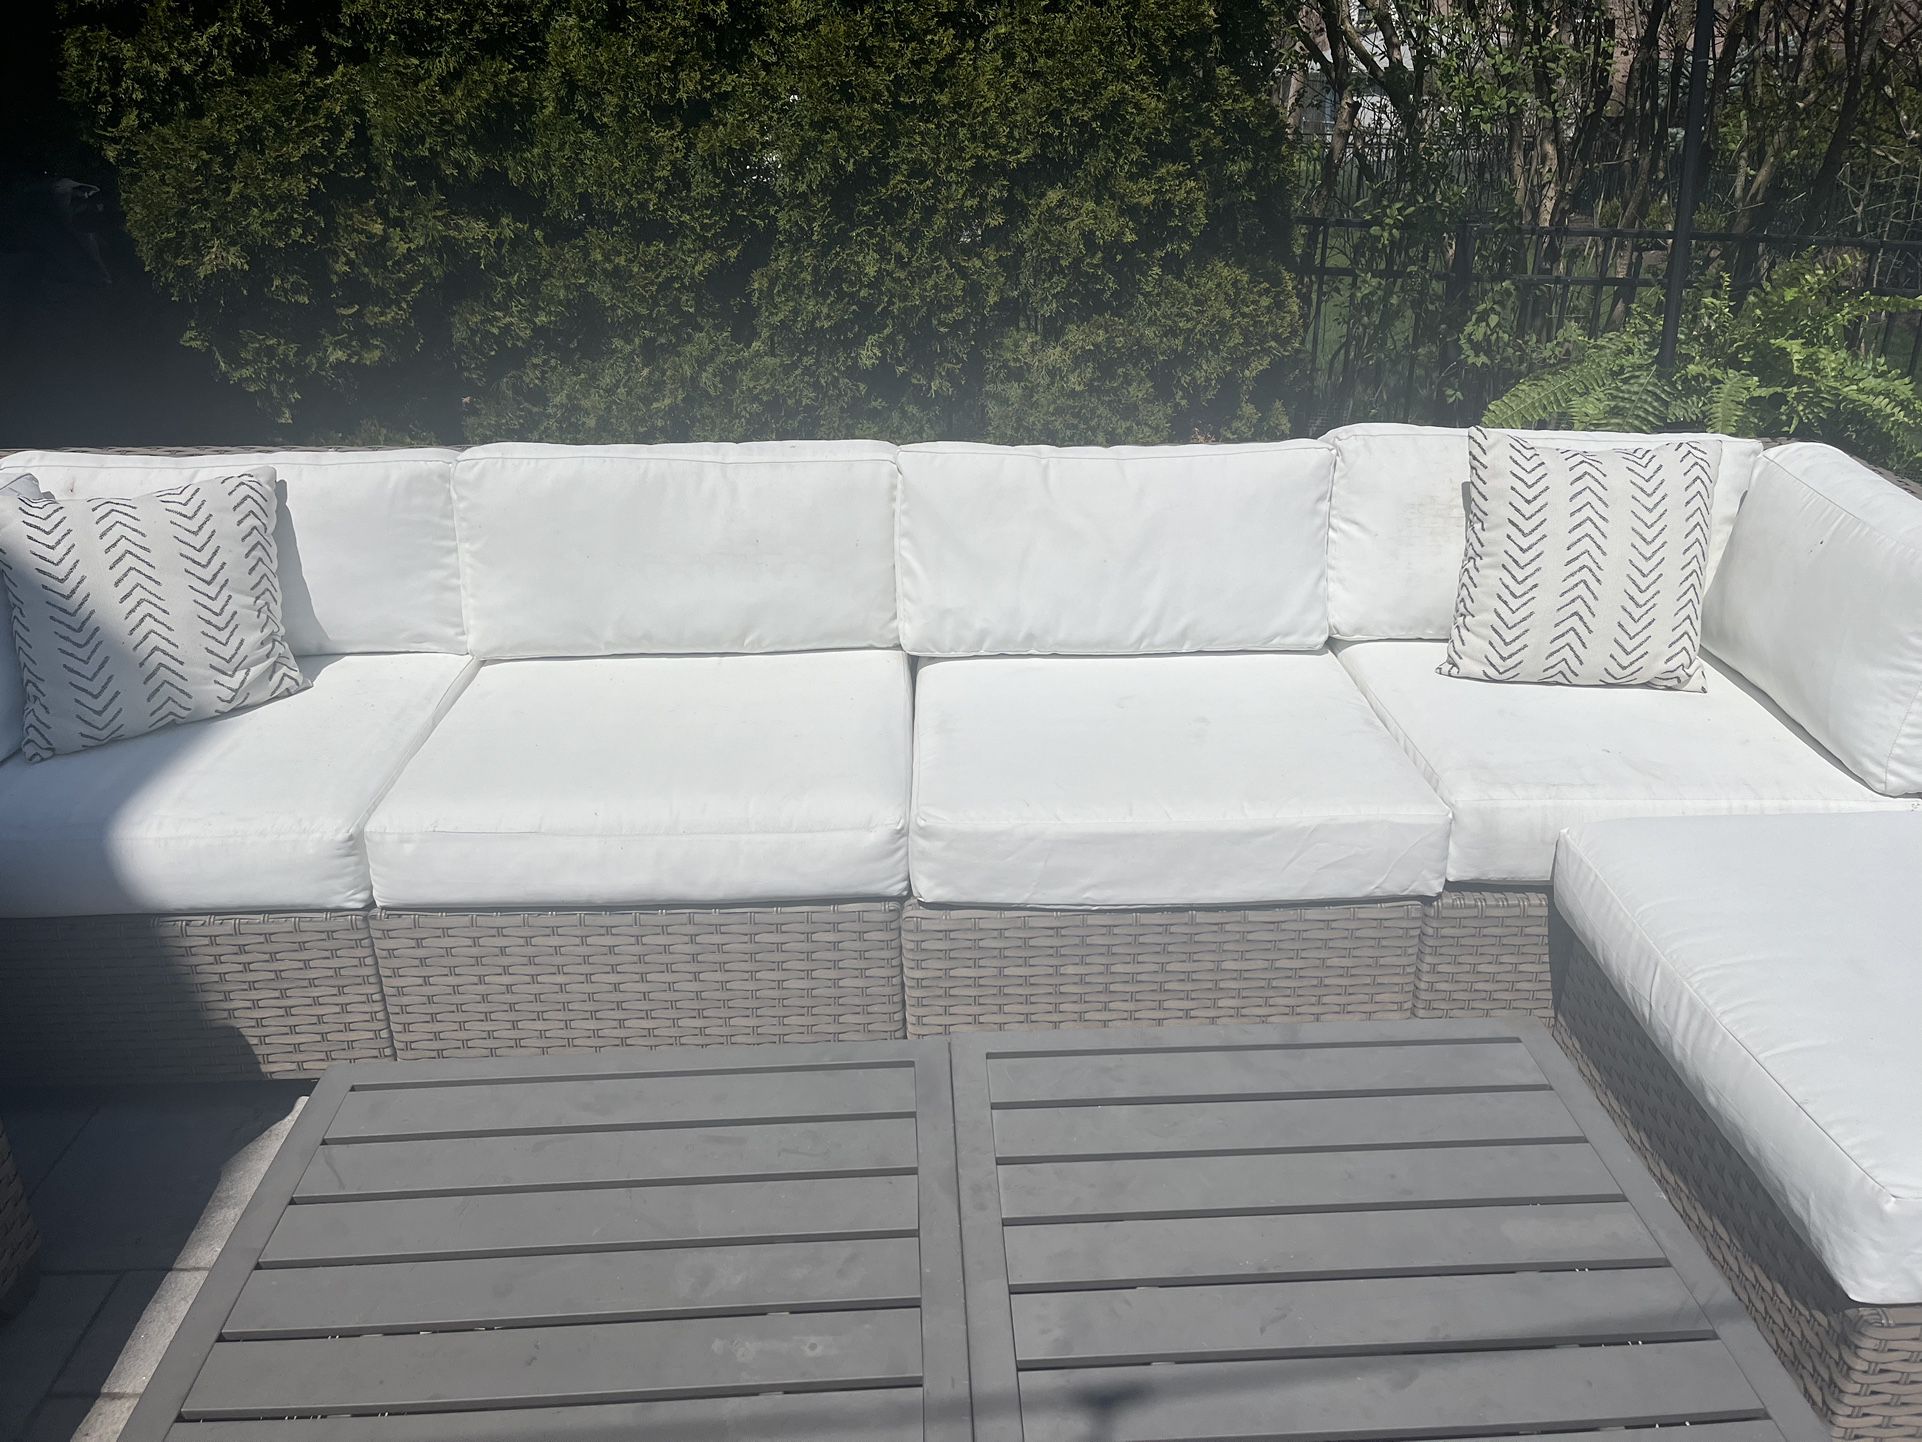  8 Piece Sectional Seating with Cushions 